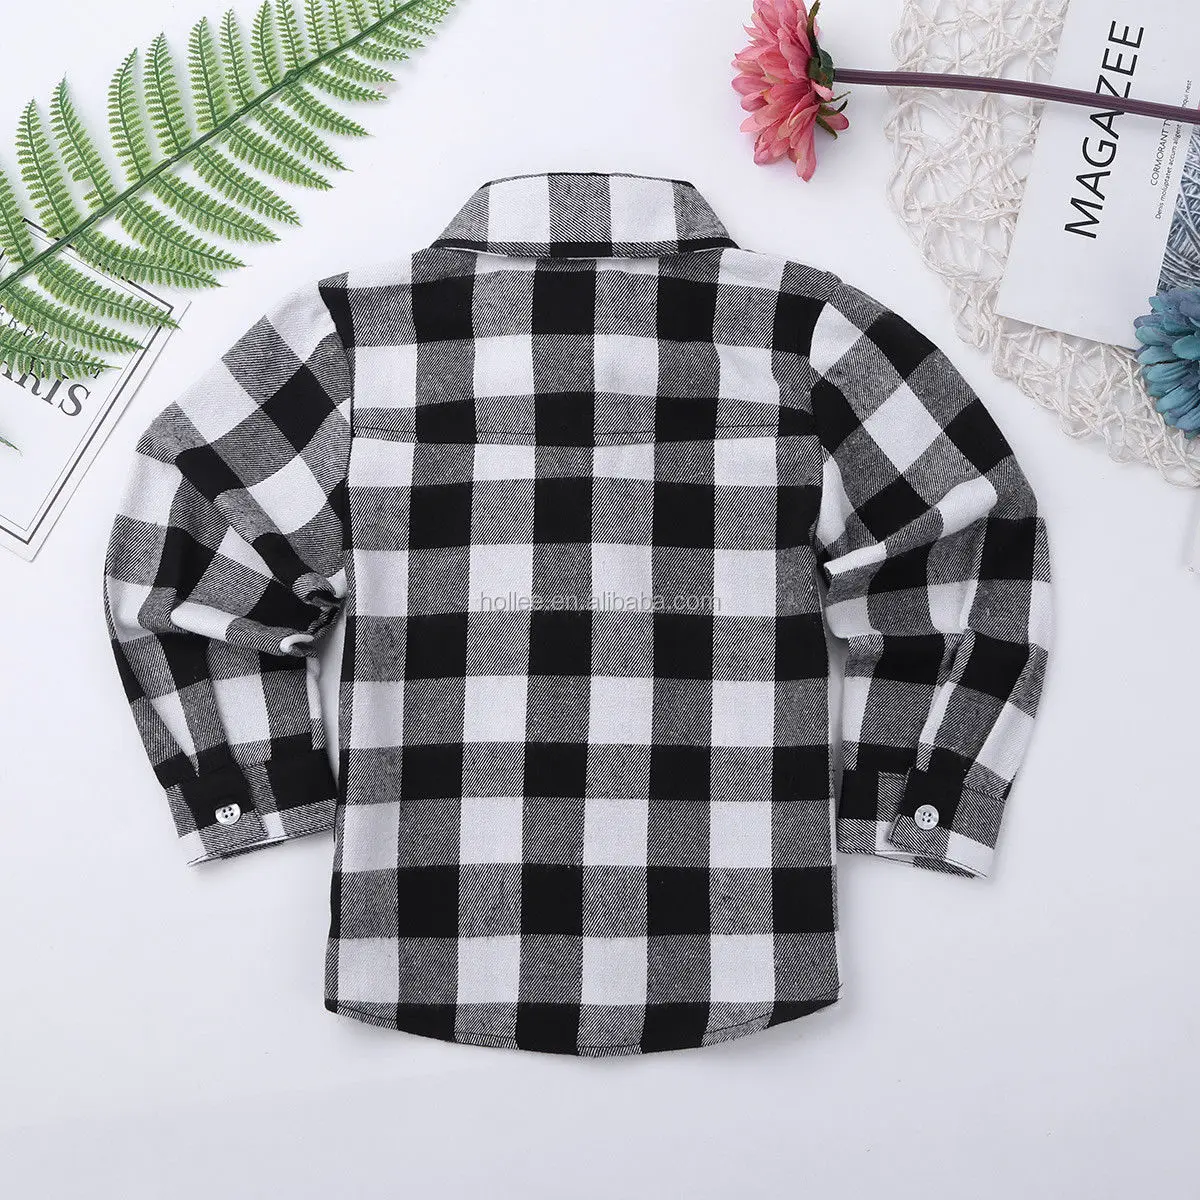 Unisex Kids Check Shirts Long Sleeves Plaid Cotton Brushed Flannel ...